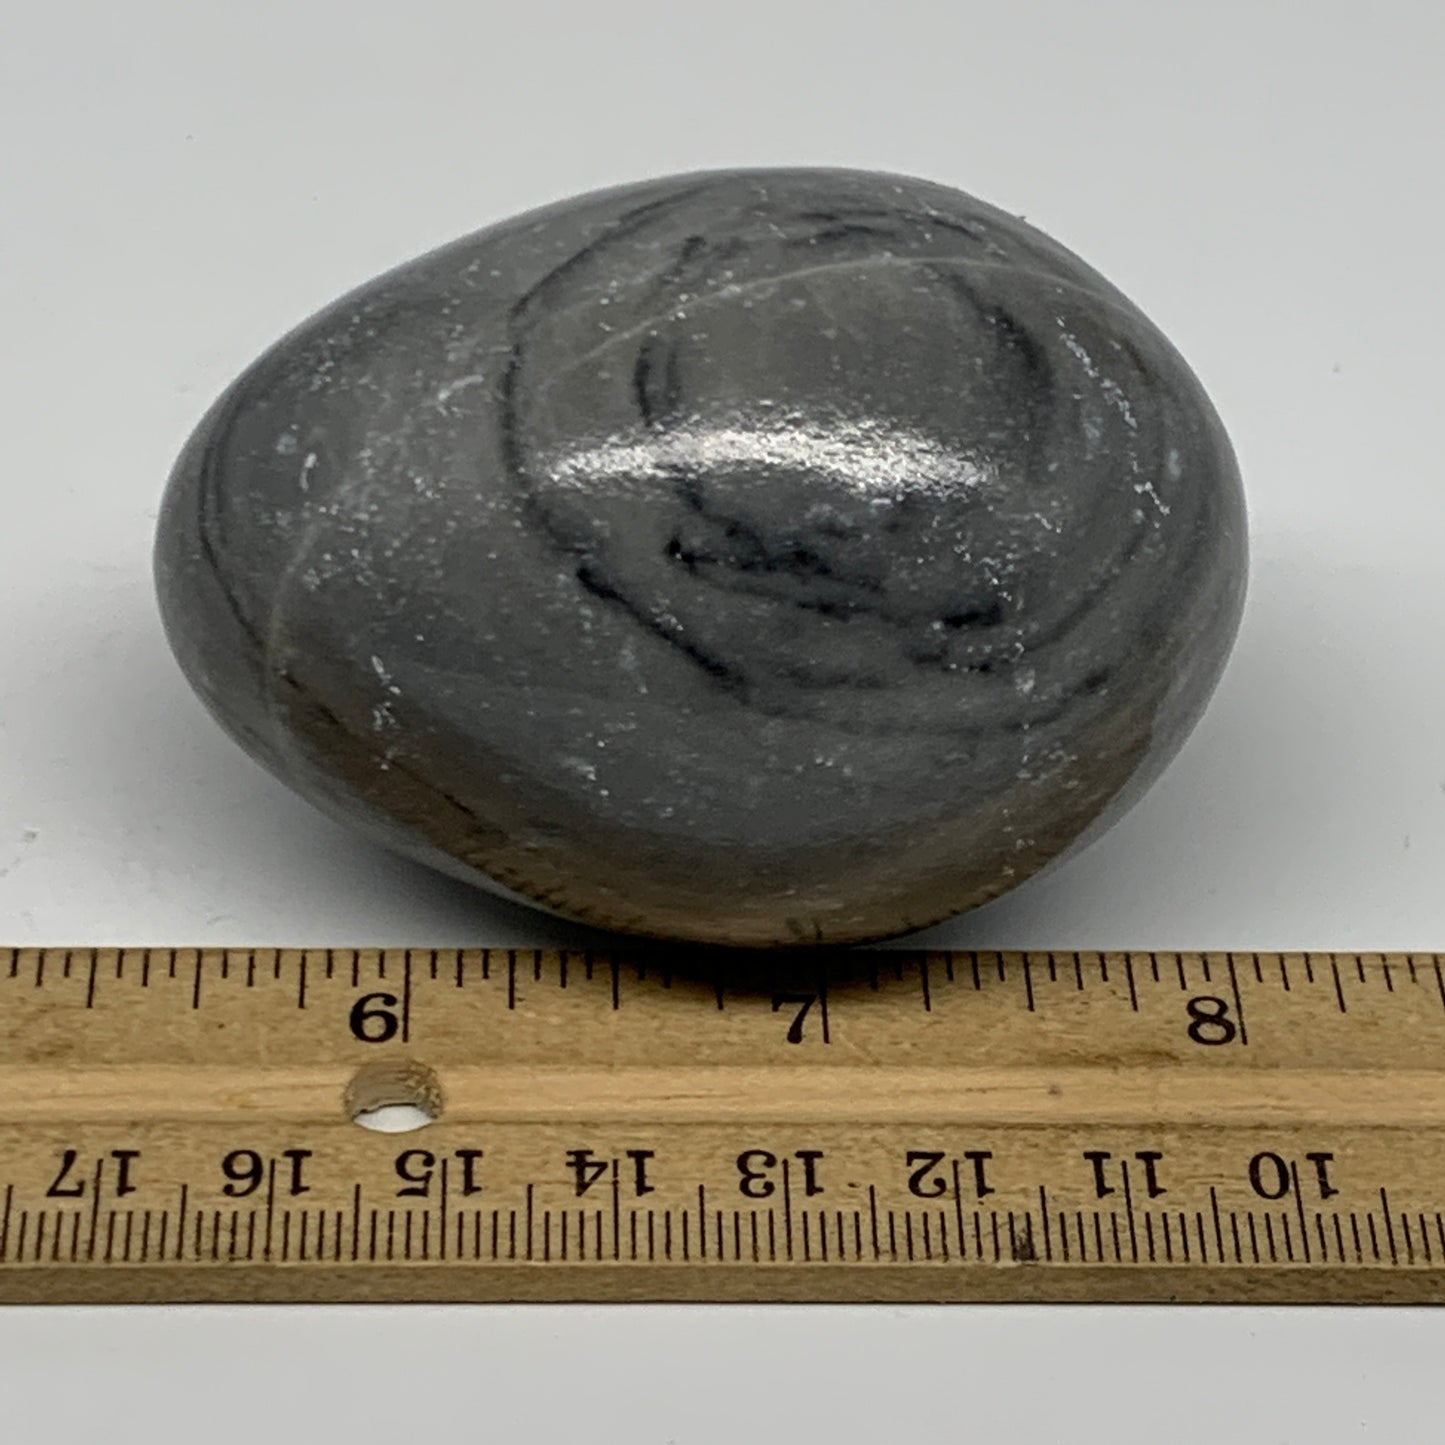 206.9g, 2.6"x1.9" Natural Gray Onyx Egg Gemstone Mineral, from Mexico, B21576